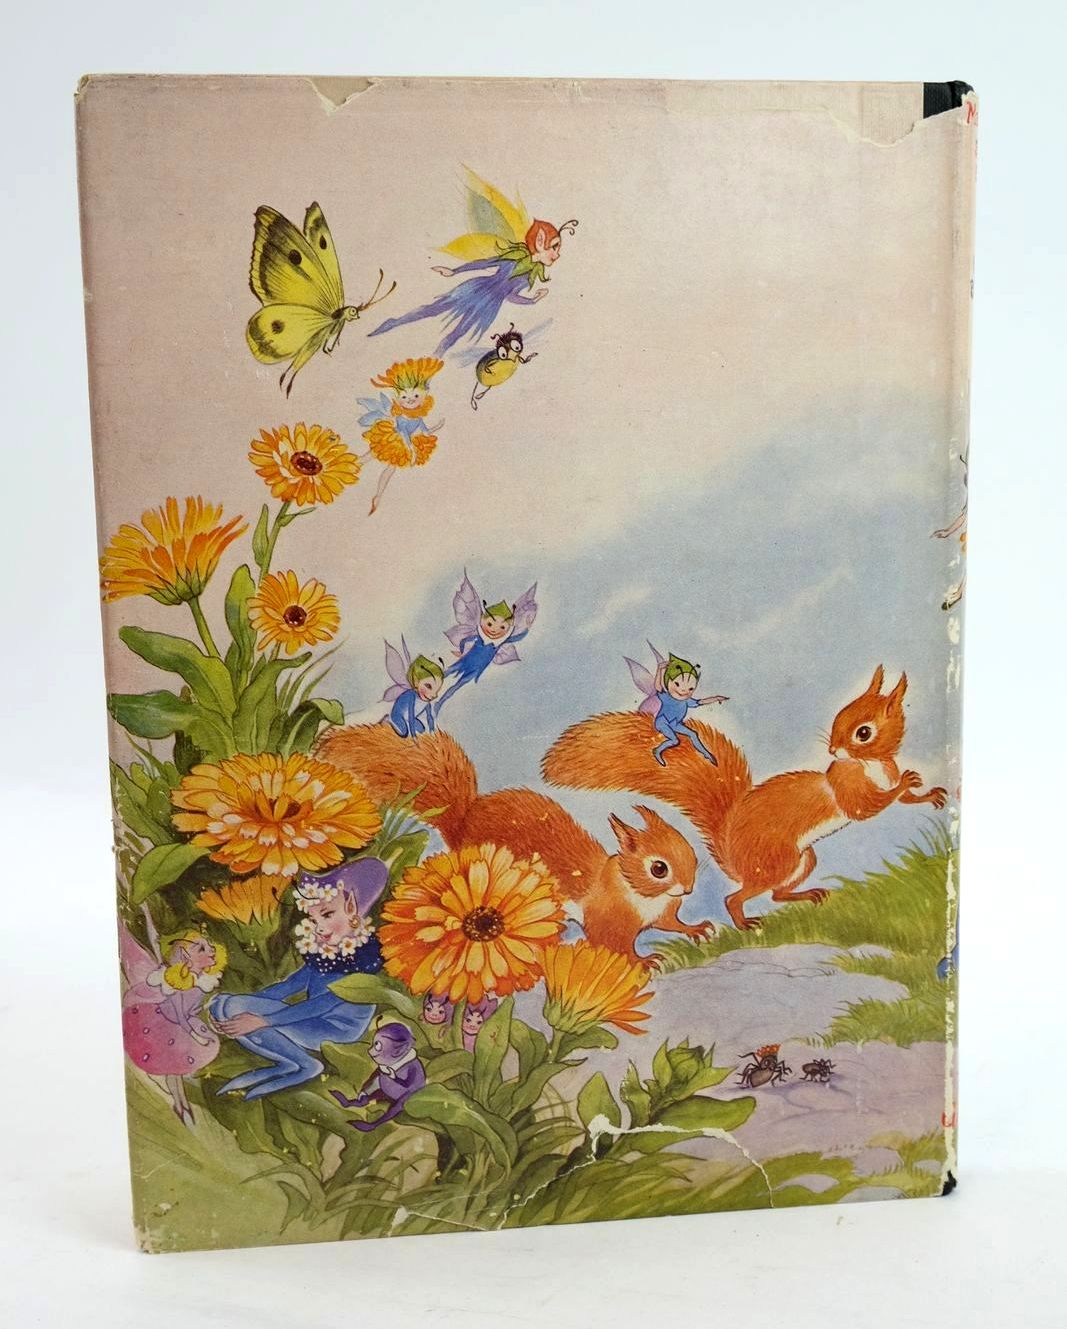 Photo of ENID BLYTON'S MARIGOLD STORY BOOK written by Blyton, Enid illustrated by Boswell, Hilda
Hall, Dorothy
et al.,  published by John Gifford Ltd. (STOCK CODE: 1319507)  for sale by Stella & Rose's Books